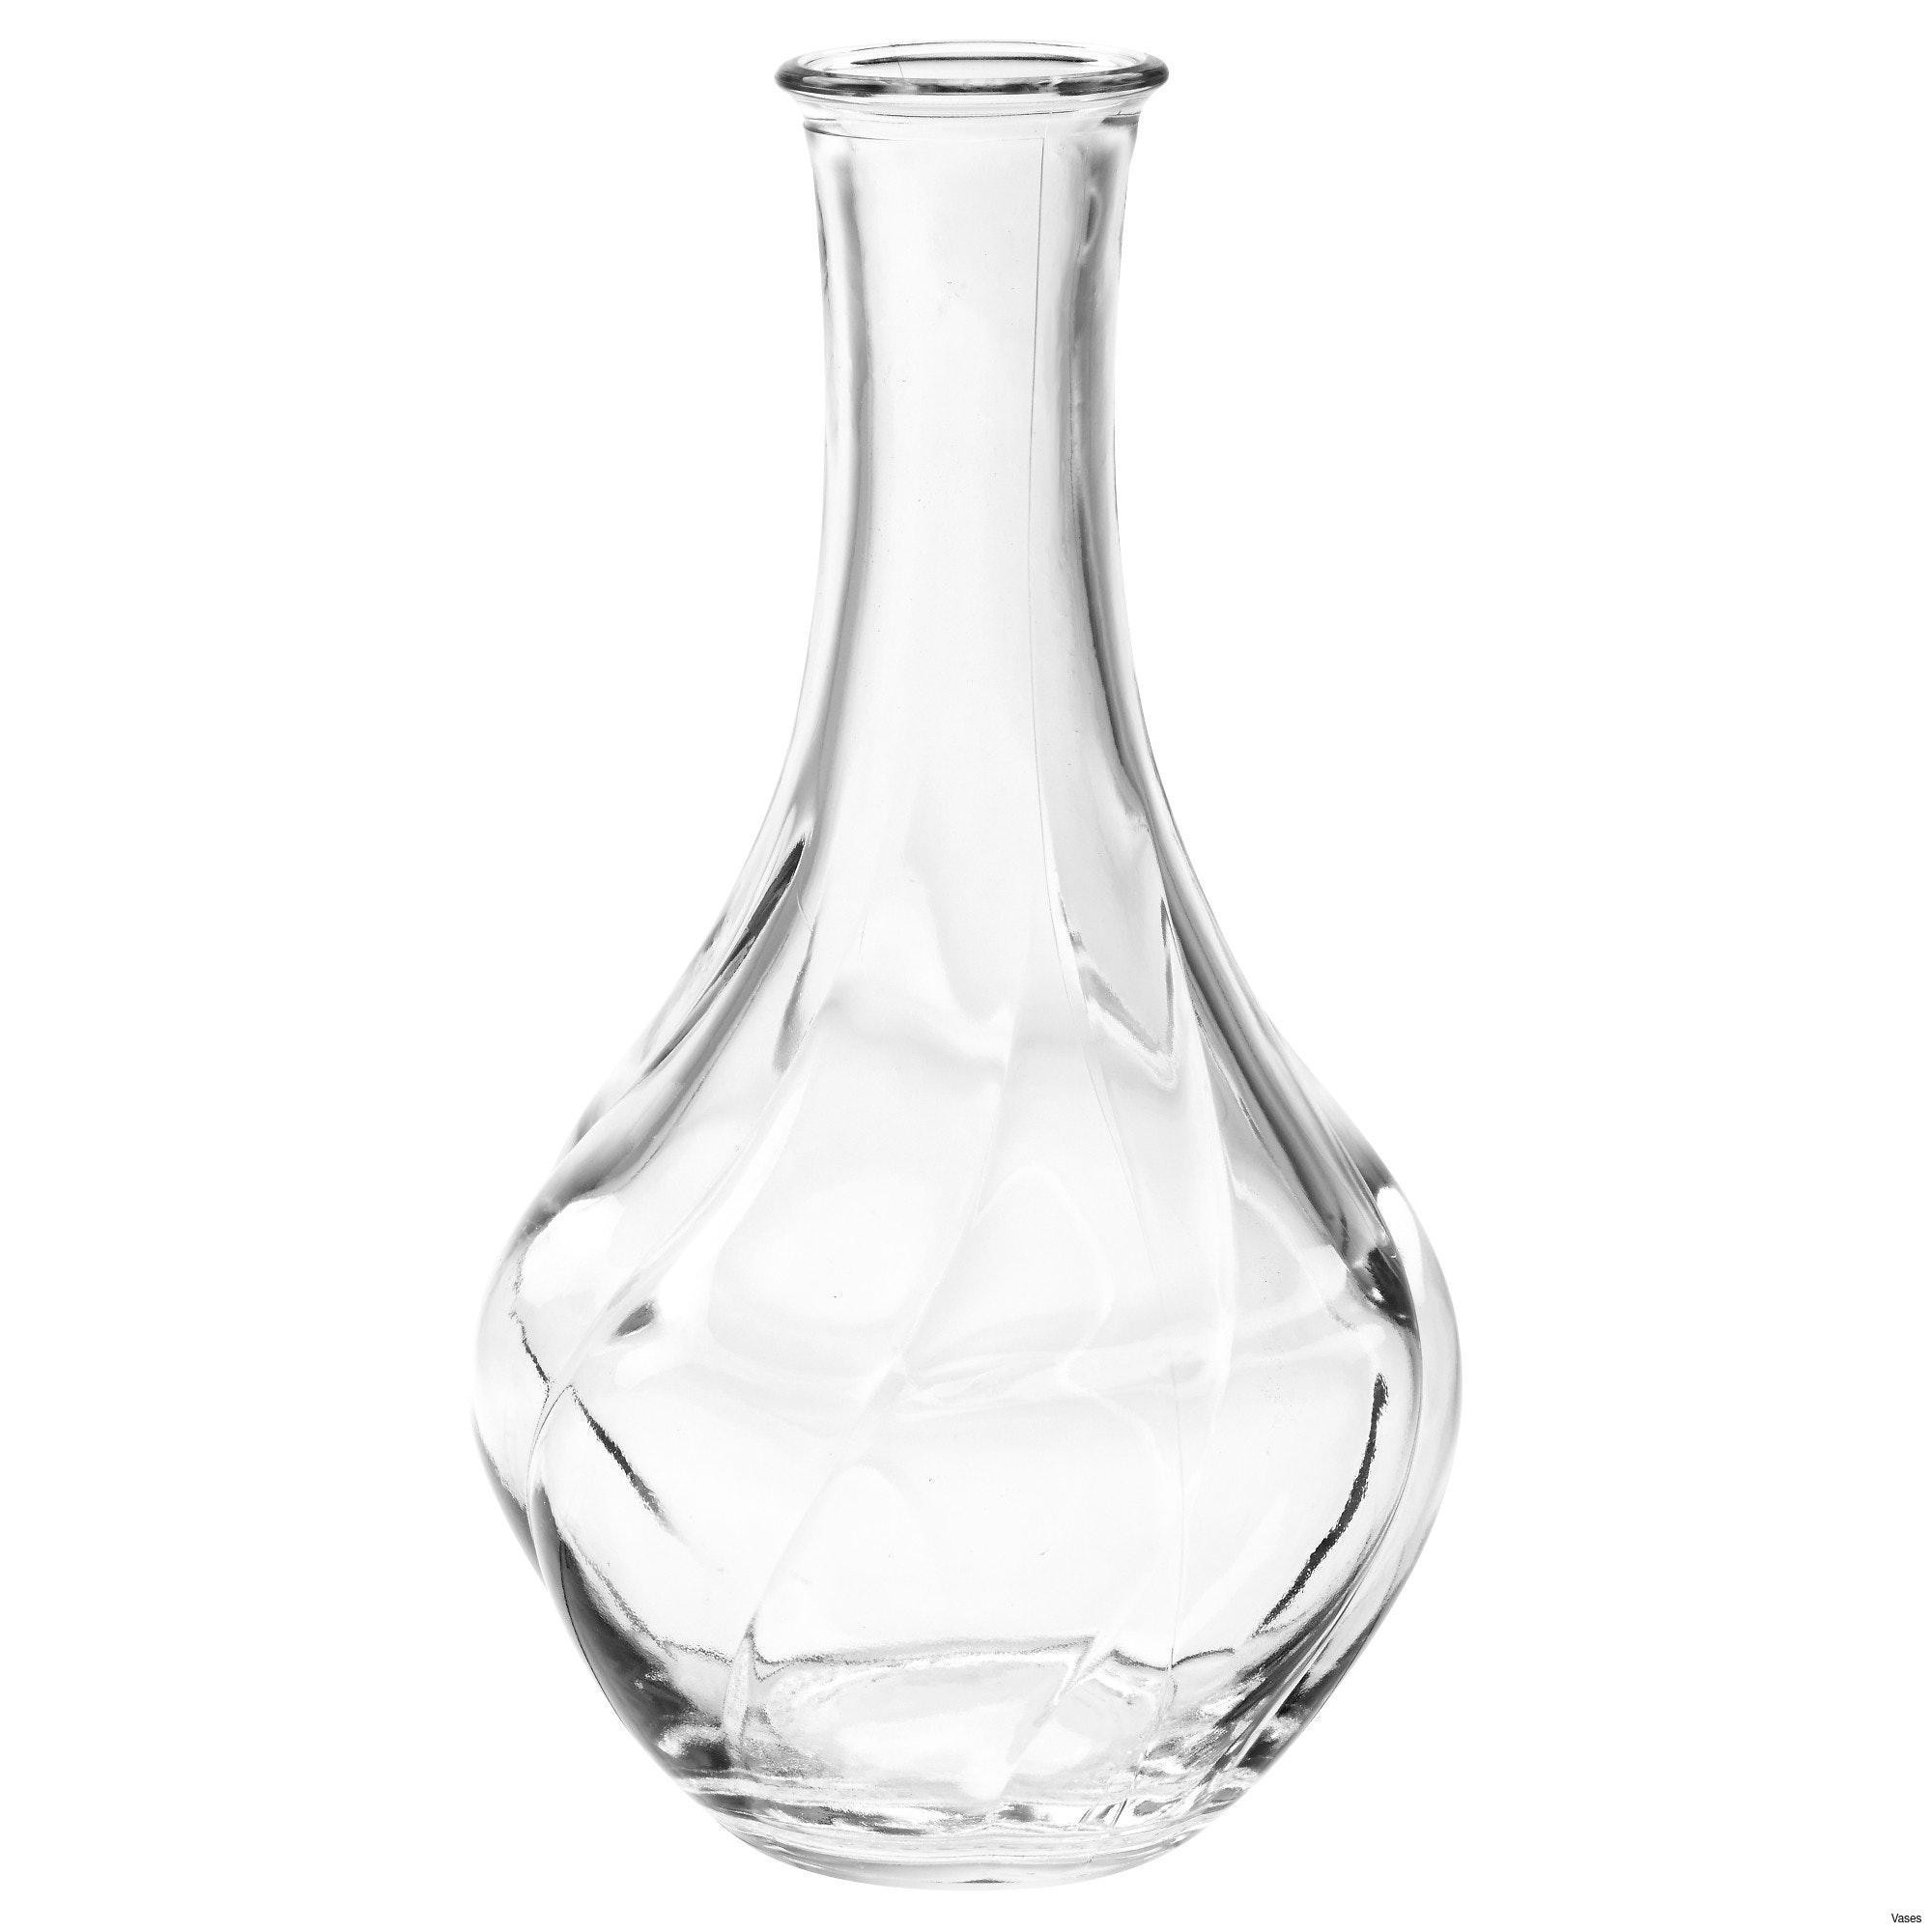 Long Neck Clear Glass Vase Of Huge Glass Vase Photos Antique C F Monroe Kelva Glass Vase Heavy for Huge Glass Vase Photos Living Room Glass Vases Fresh Clear Vase 0d Tags Amazing and Of